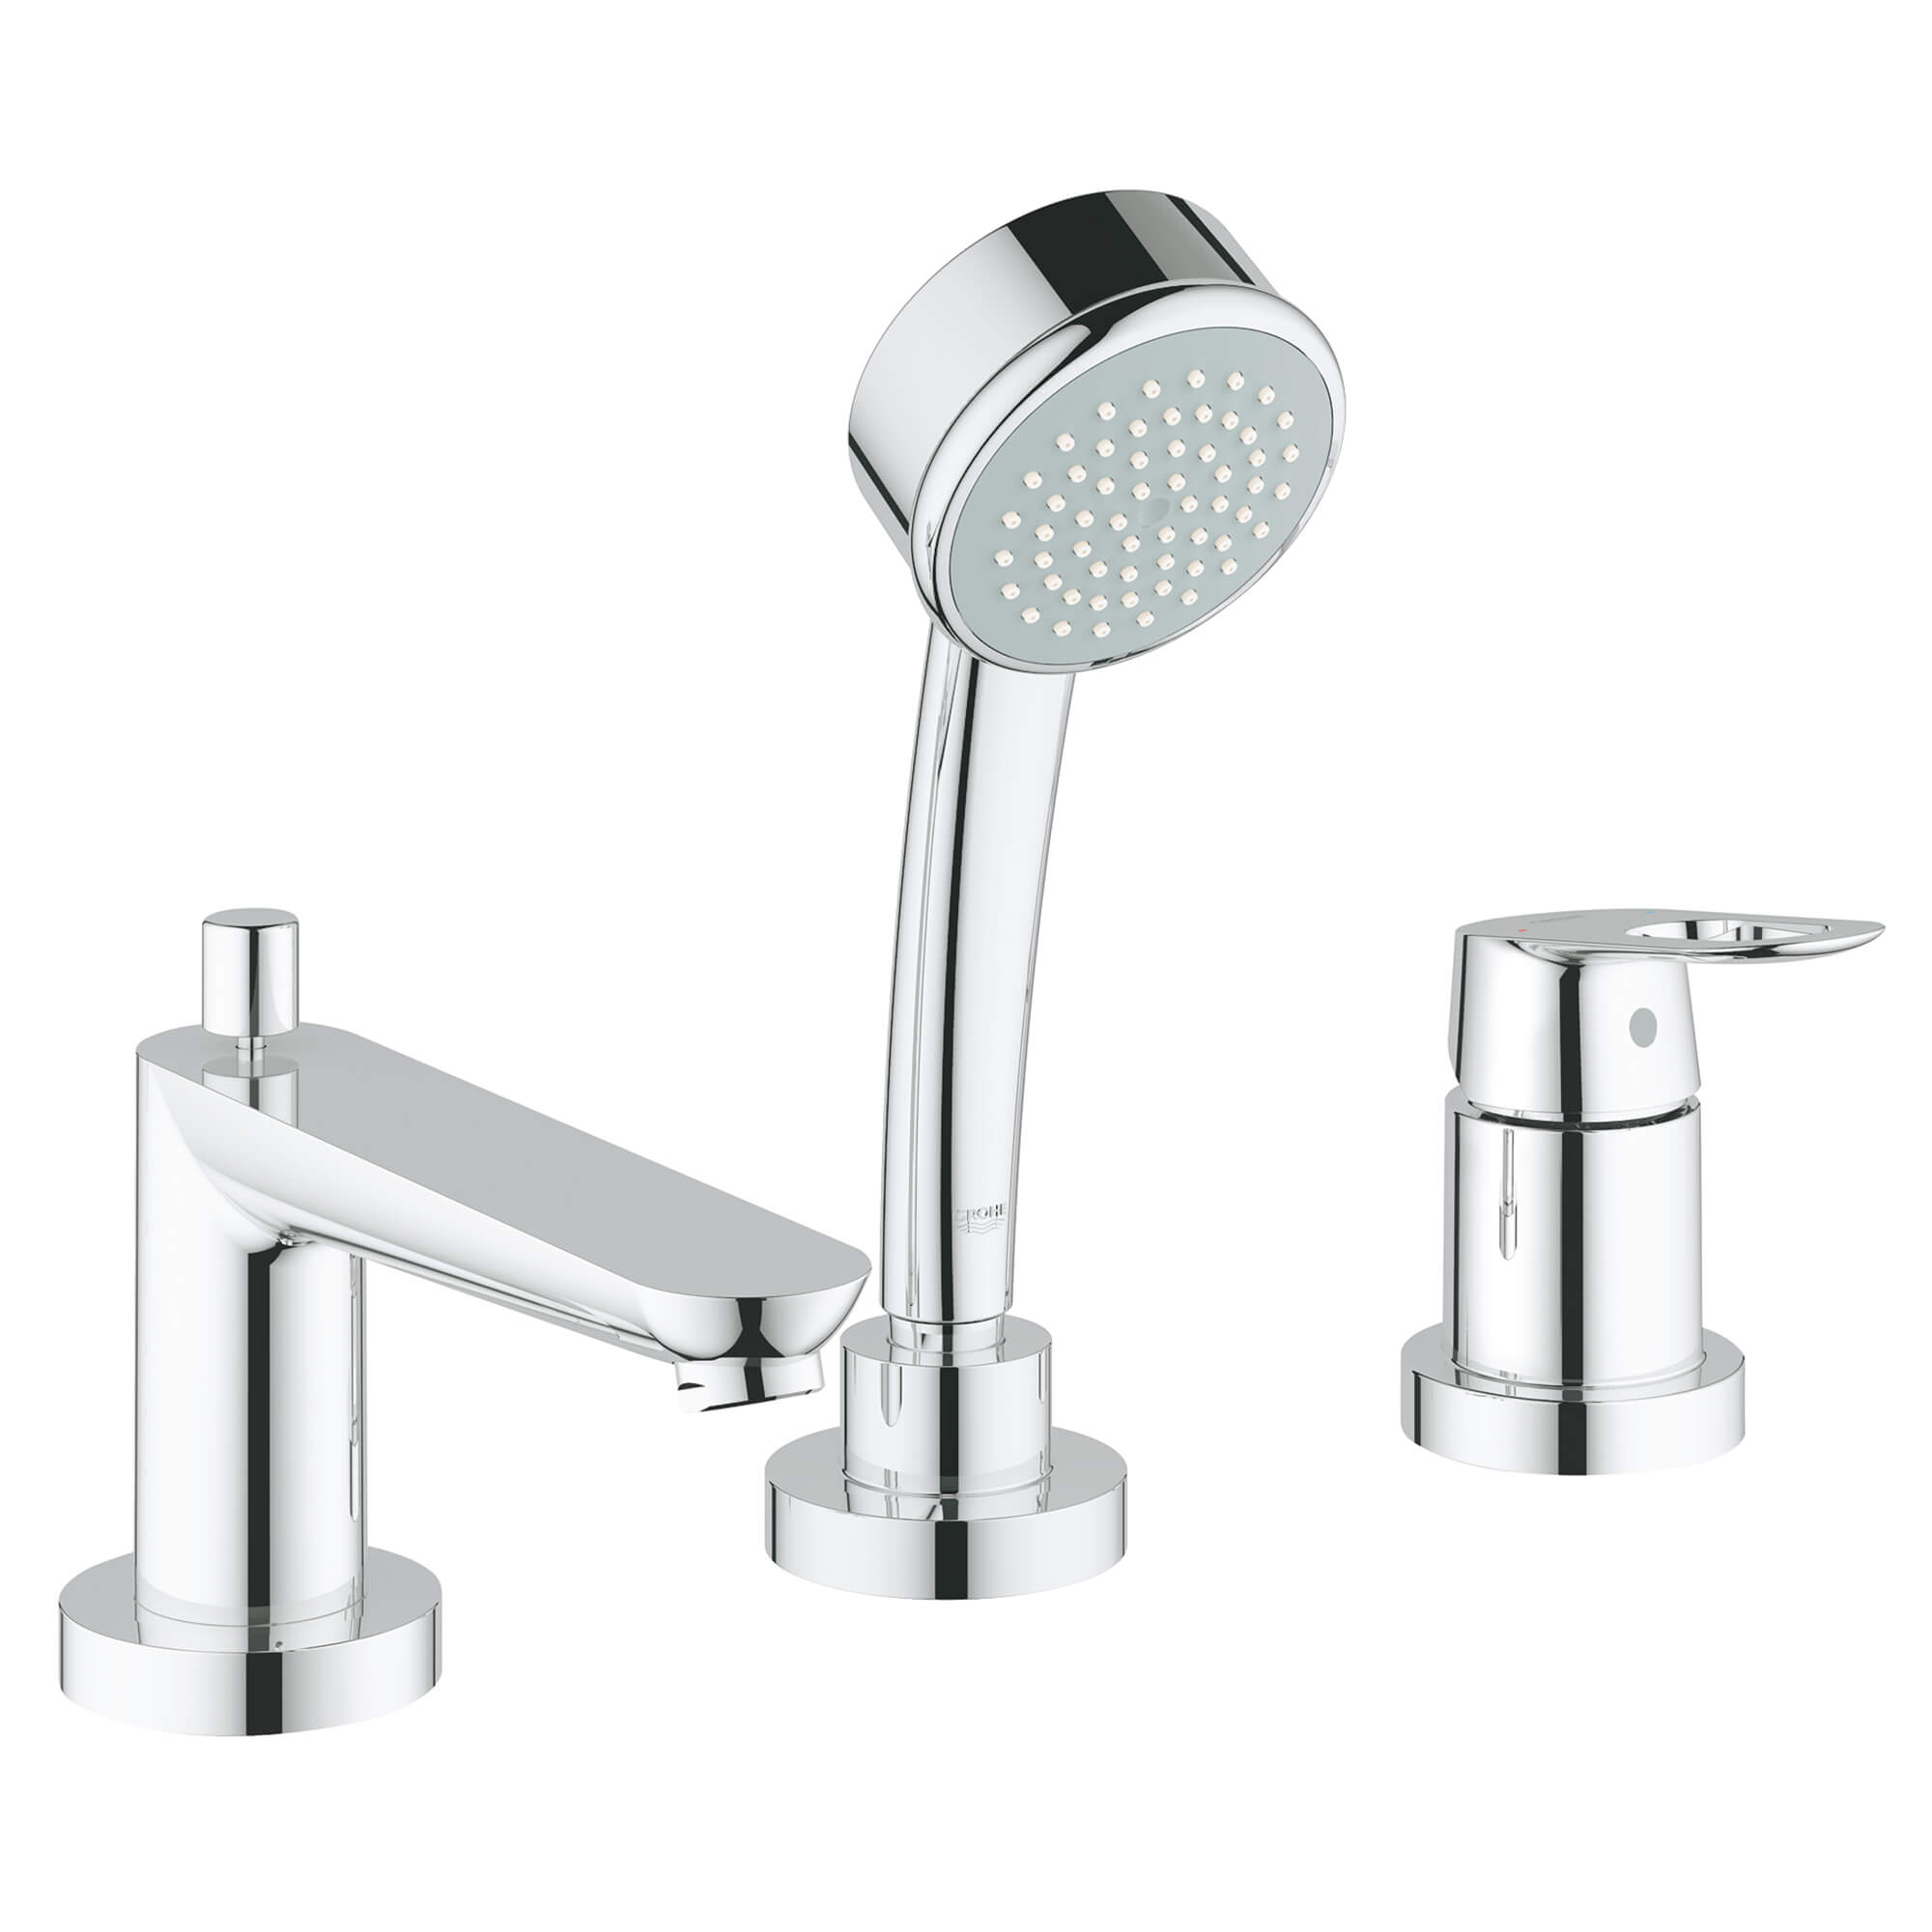 3-Hole Single-Handle Deck Mount Roman Tub Faucet with 7.6 L/min (2.0 gpm) Hand Shower